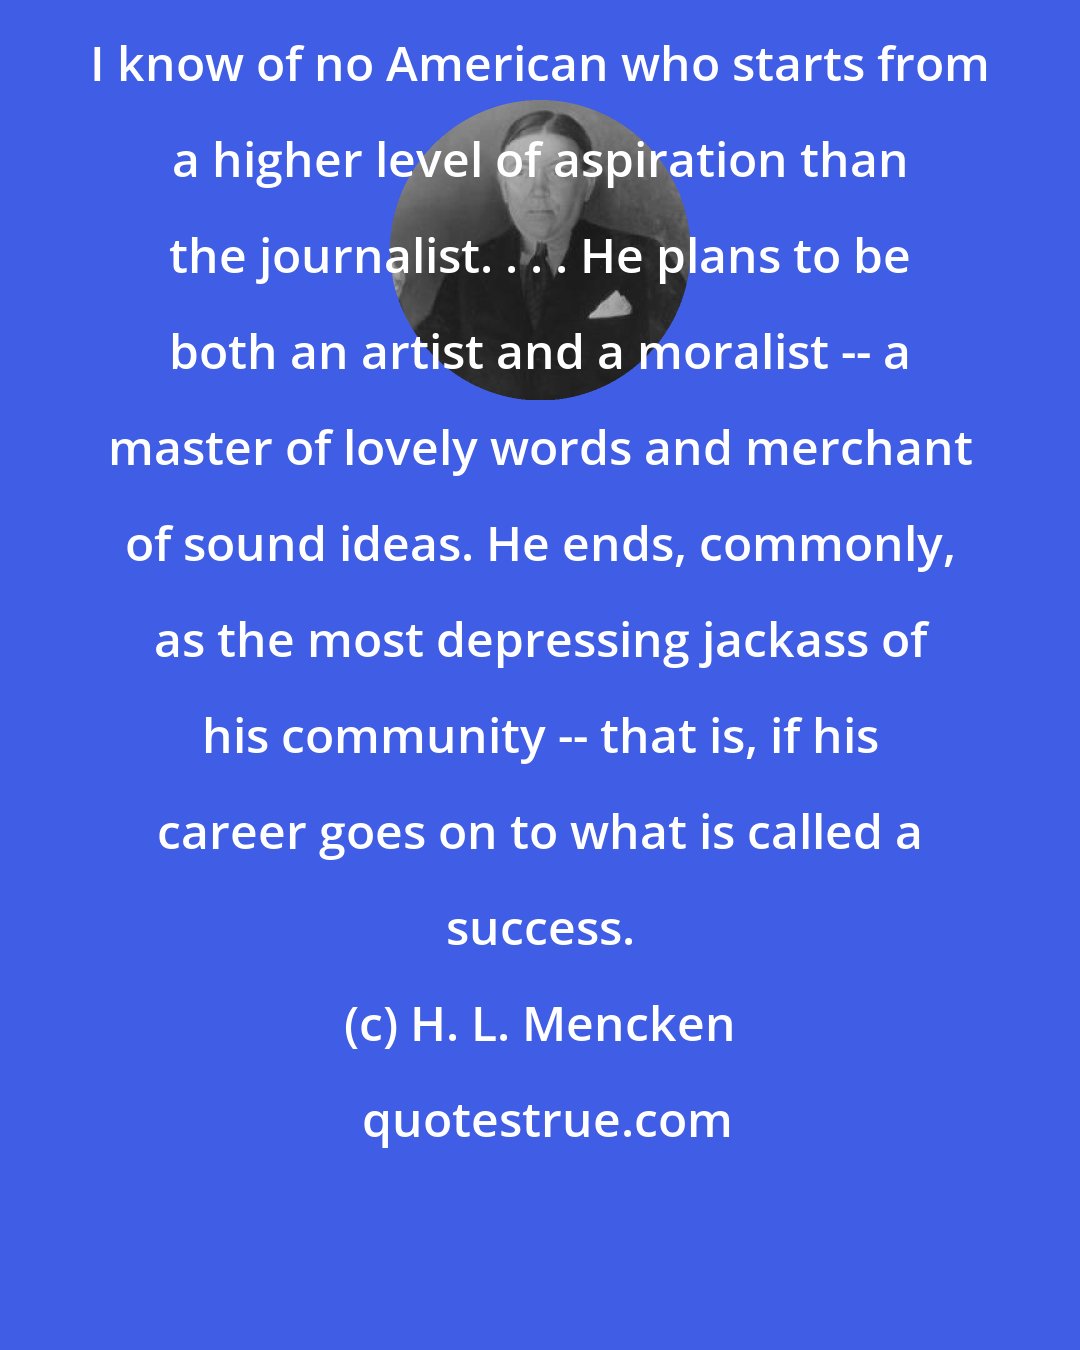 H. L. Mencken: I know of no American who starts from a higher level of aspiration than the journalist. . . . He plans to be both an artist and a moralist -- a master of lovely words and merchant of sound ideas. He ends, commonly, as the most depressing jackass of his community -- that is, if his career goes on to what is called a success.